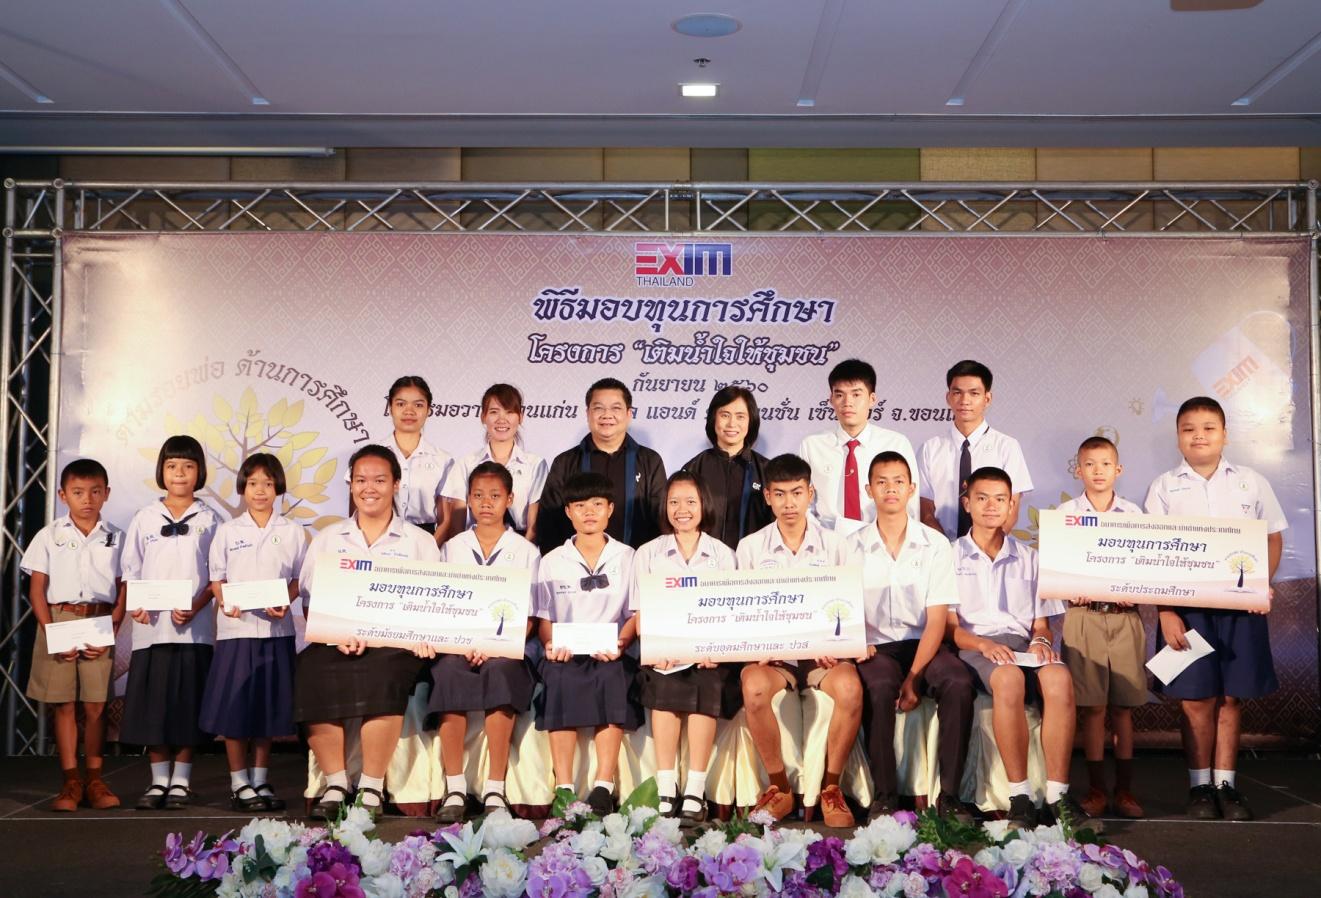 EXIM Thailand Gives Scholarships under “Caring for the Community” Scheme in the Northeast